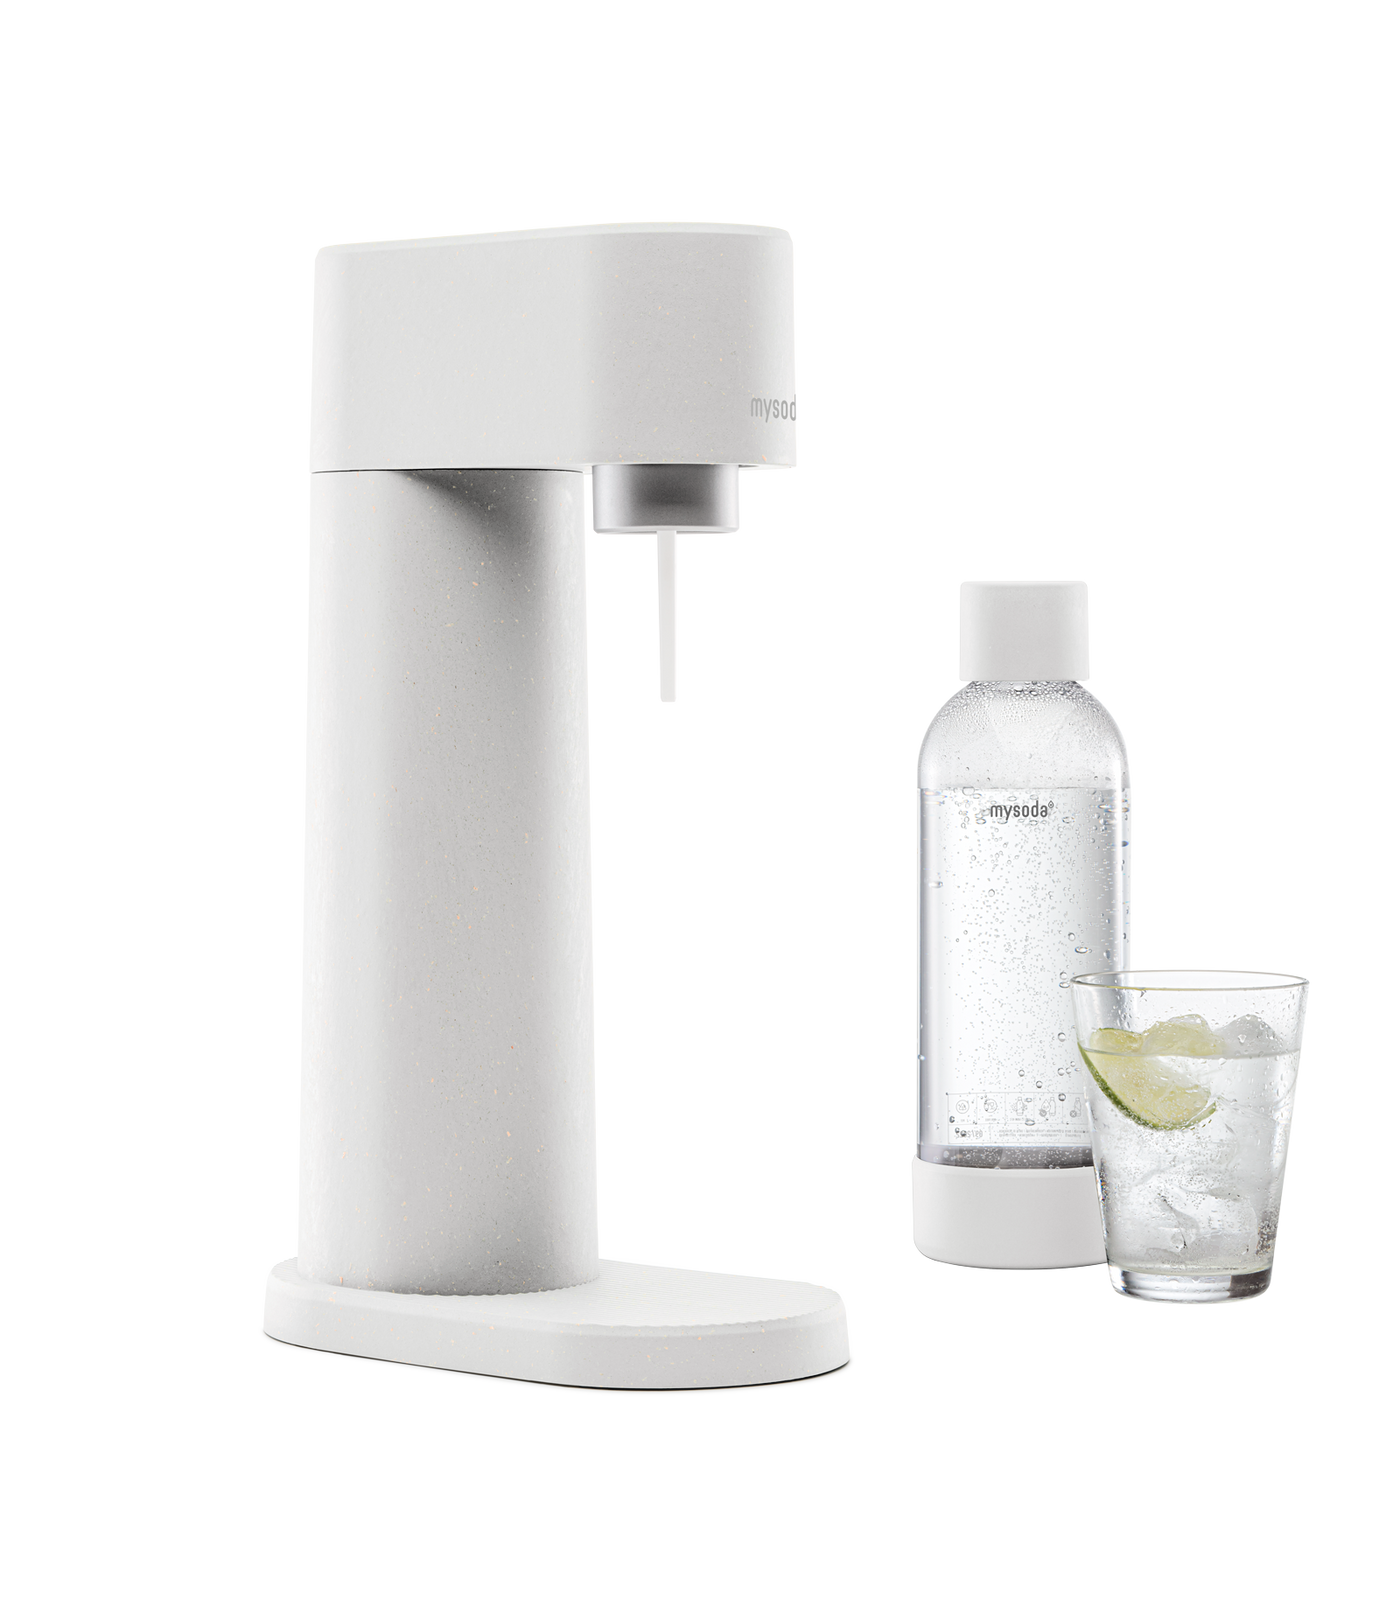 White Mysoda Woody sparkling water maker with bottle